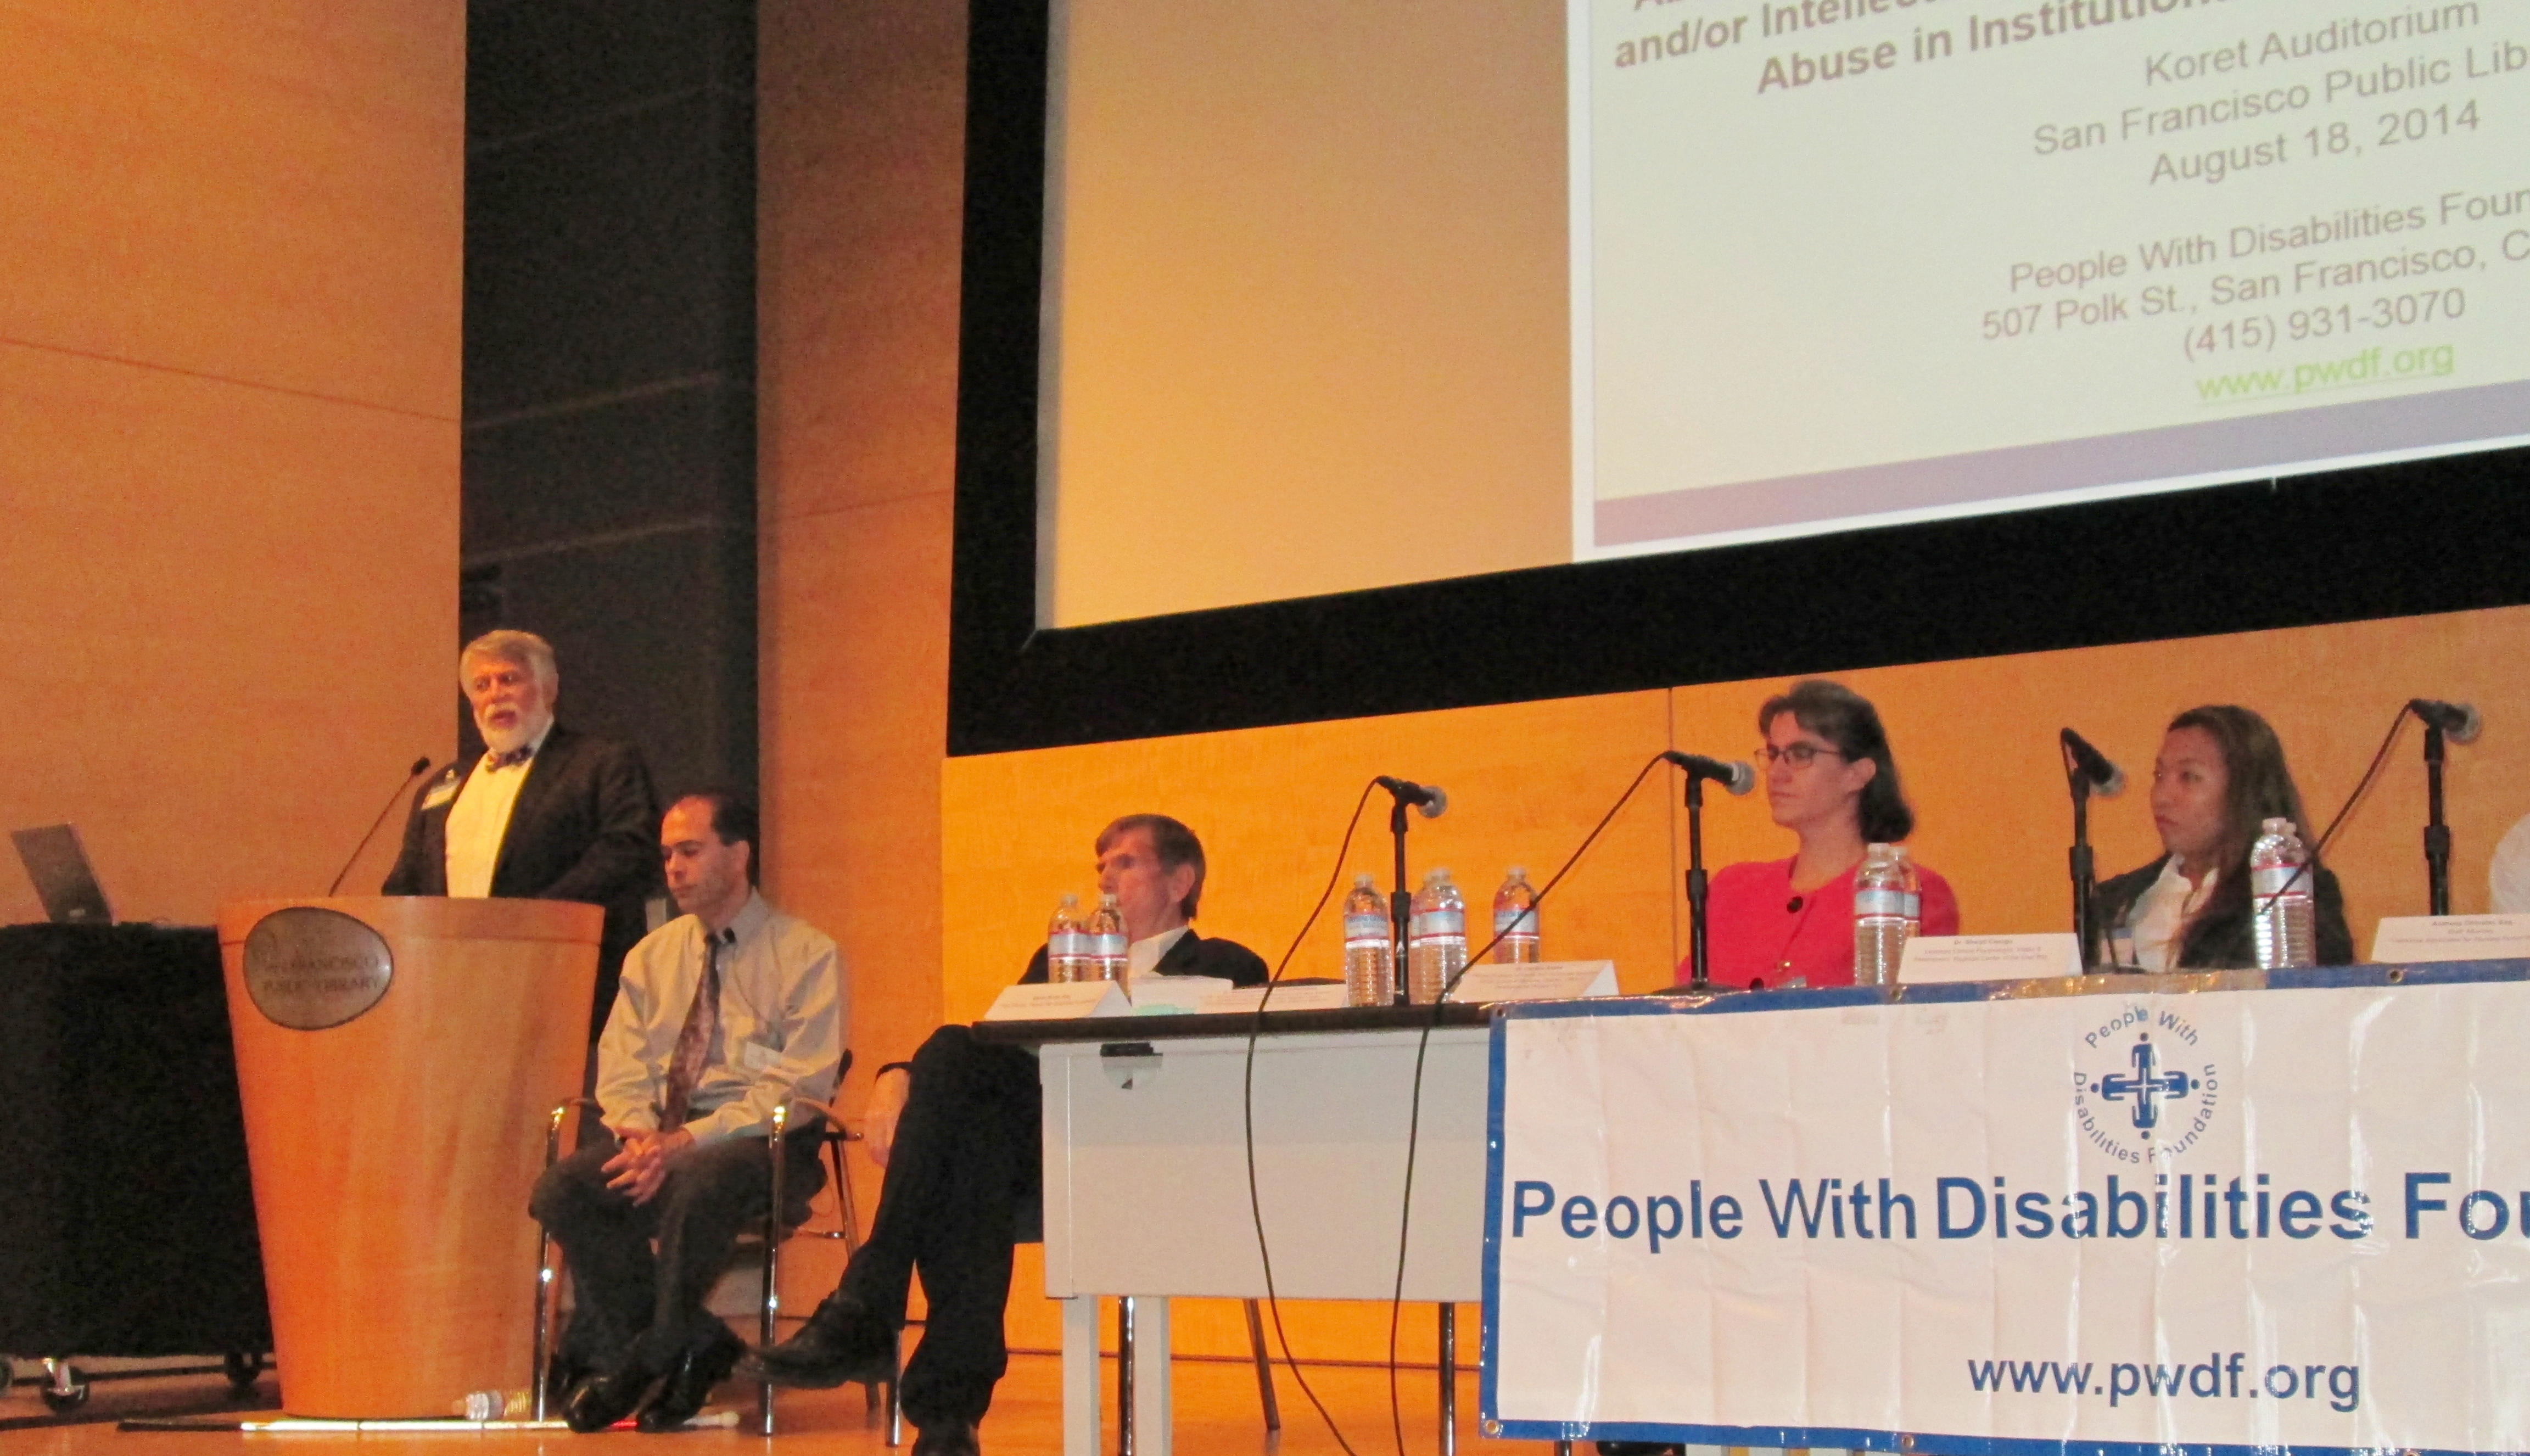 PWDF Seminar: Abuse Against People with Mental and/or Developmental Disabilities